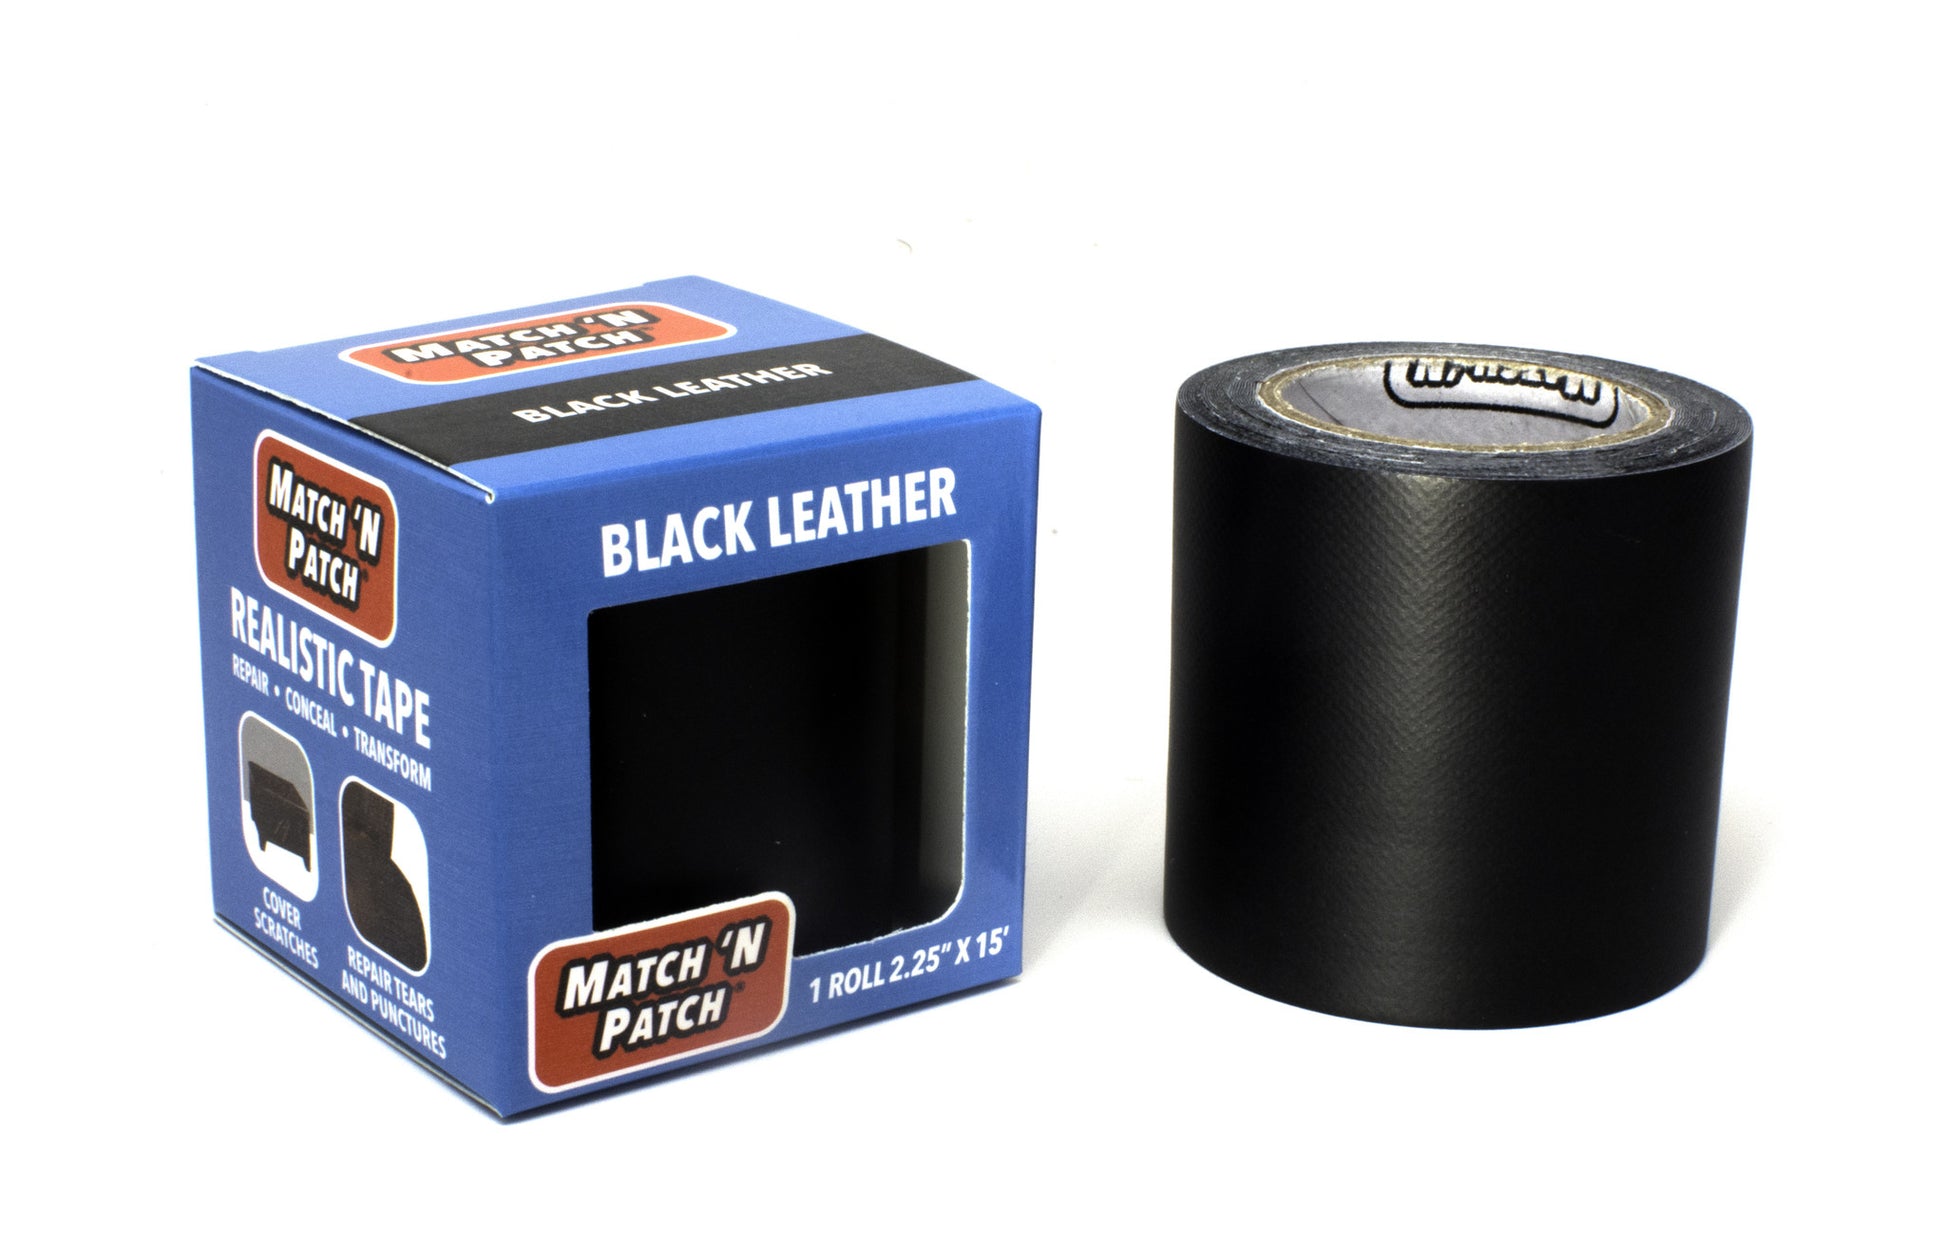 Match 'N Patch Realistic Brown Leather Repair Tape, 2.25 inch x 15 feet